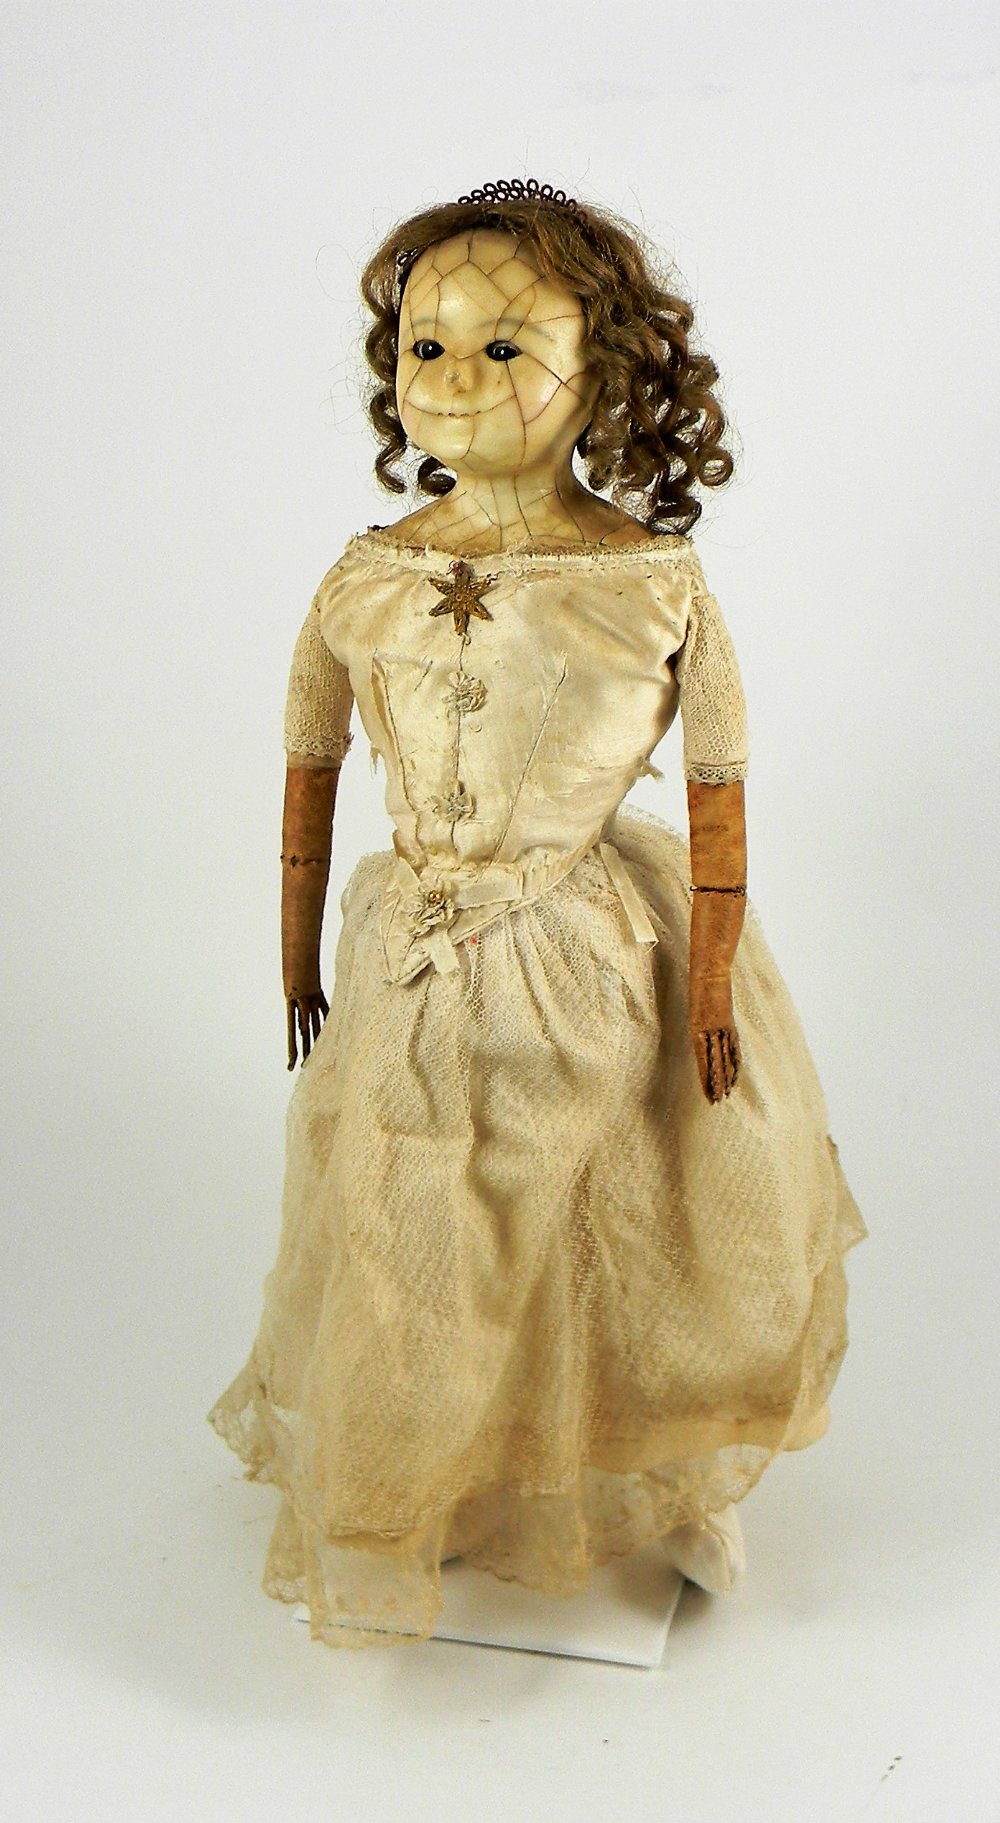 A wax over composition wire-eyed shoulder head doll, English circa 1860,